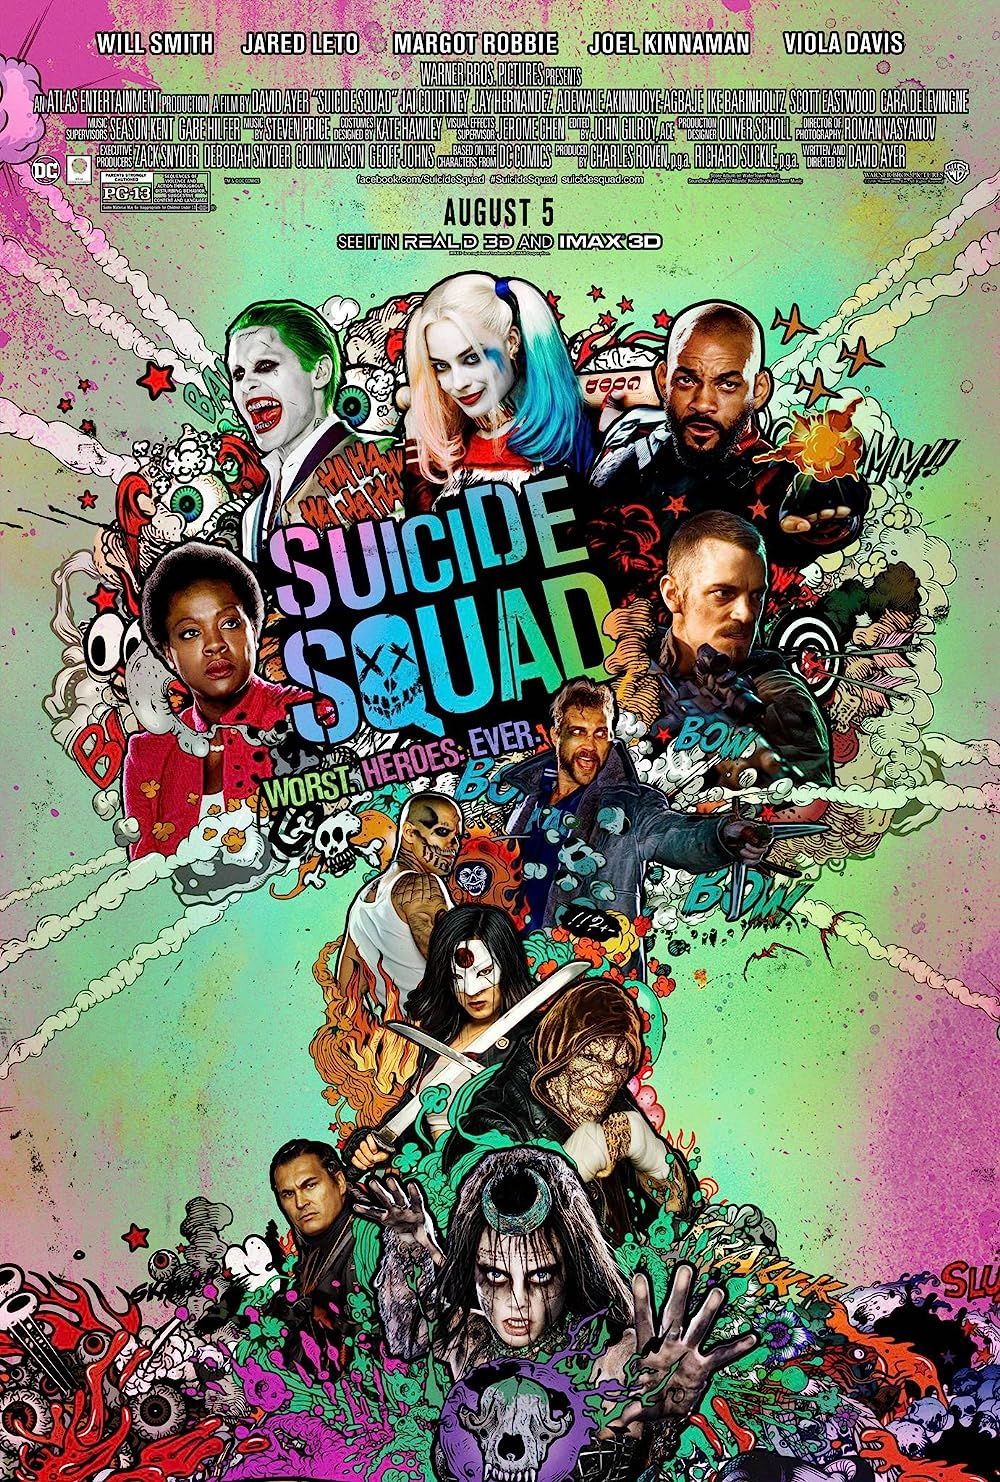 The team on the poster for Suicide Squad 2016